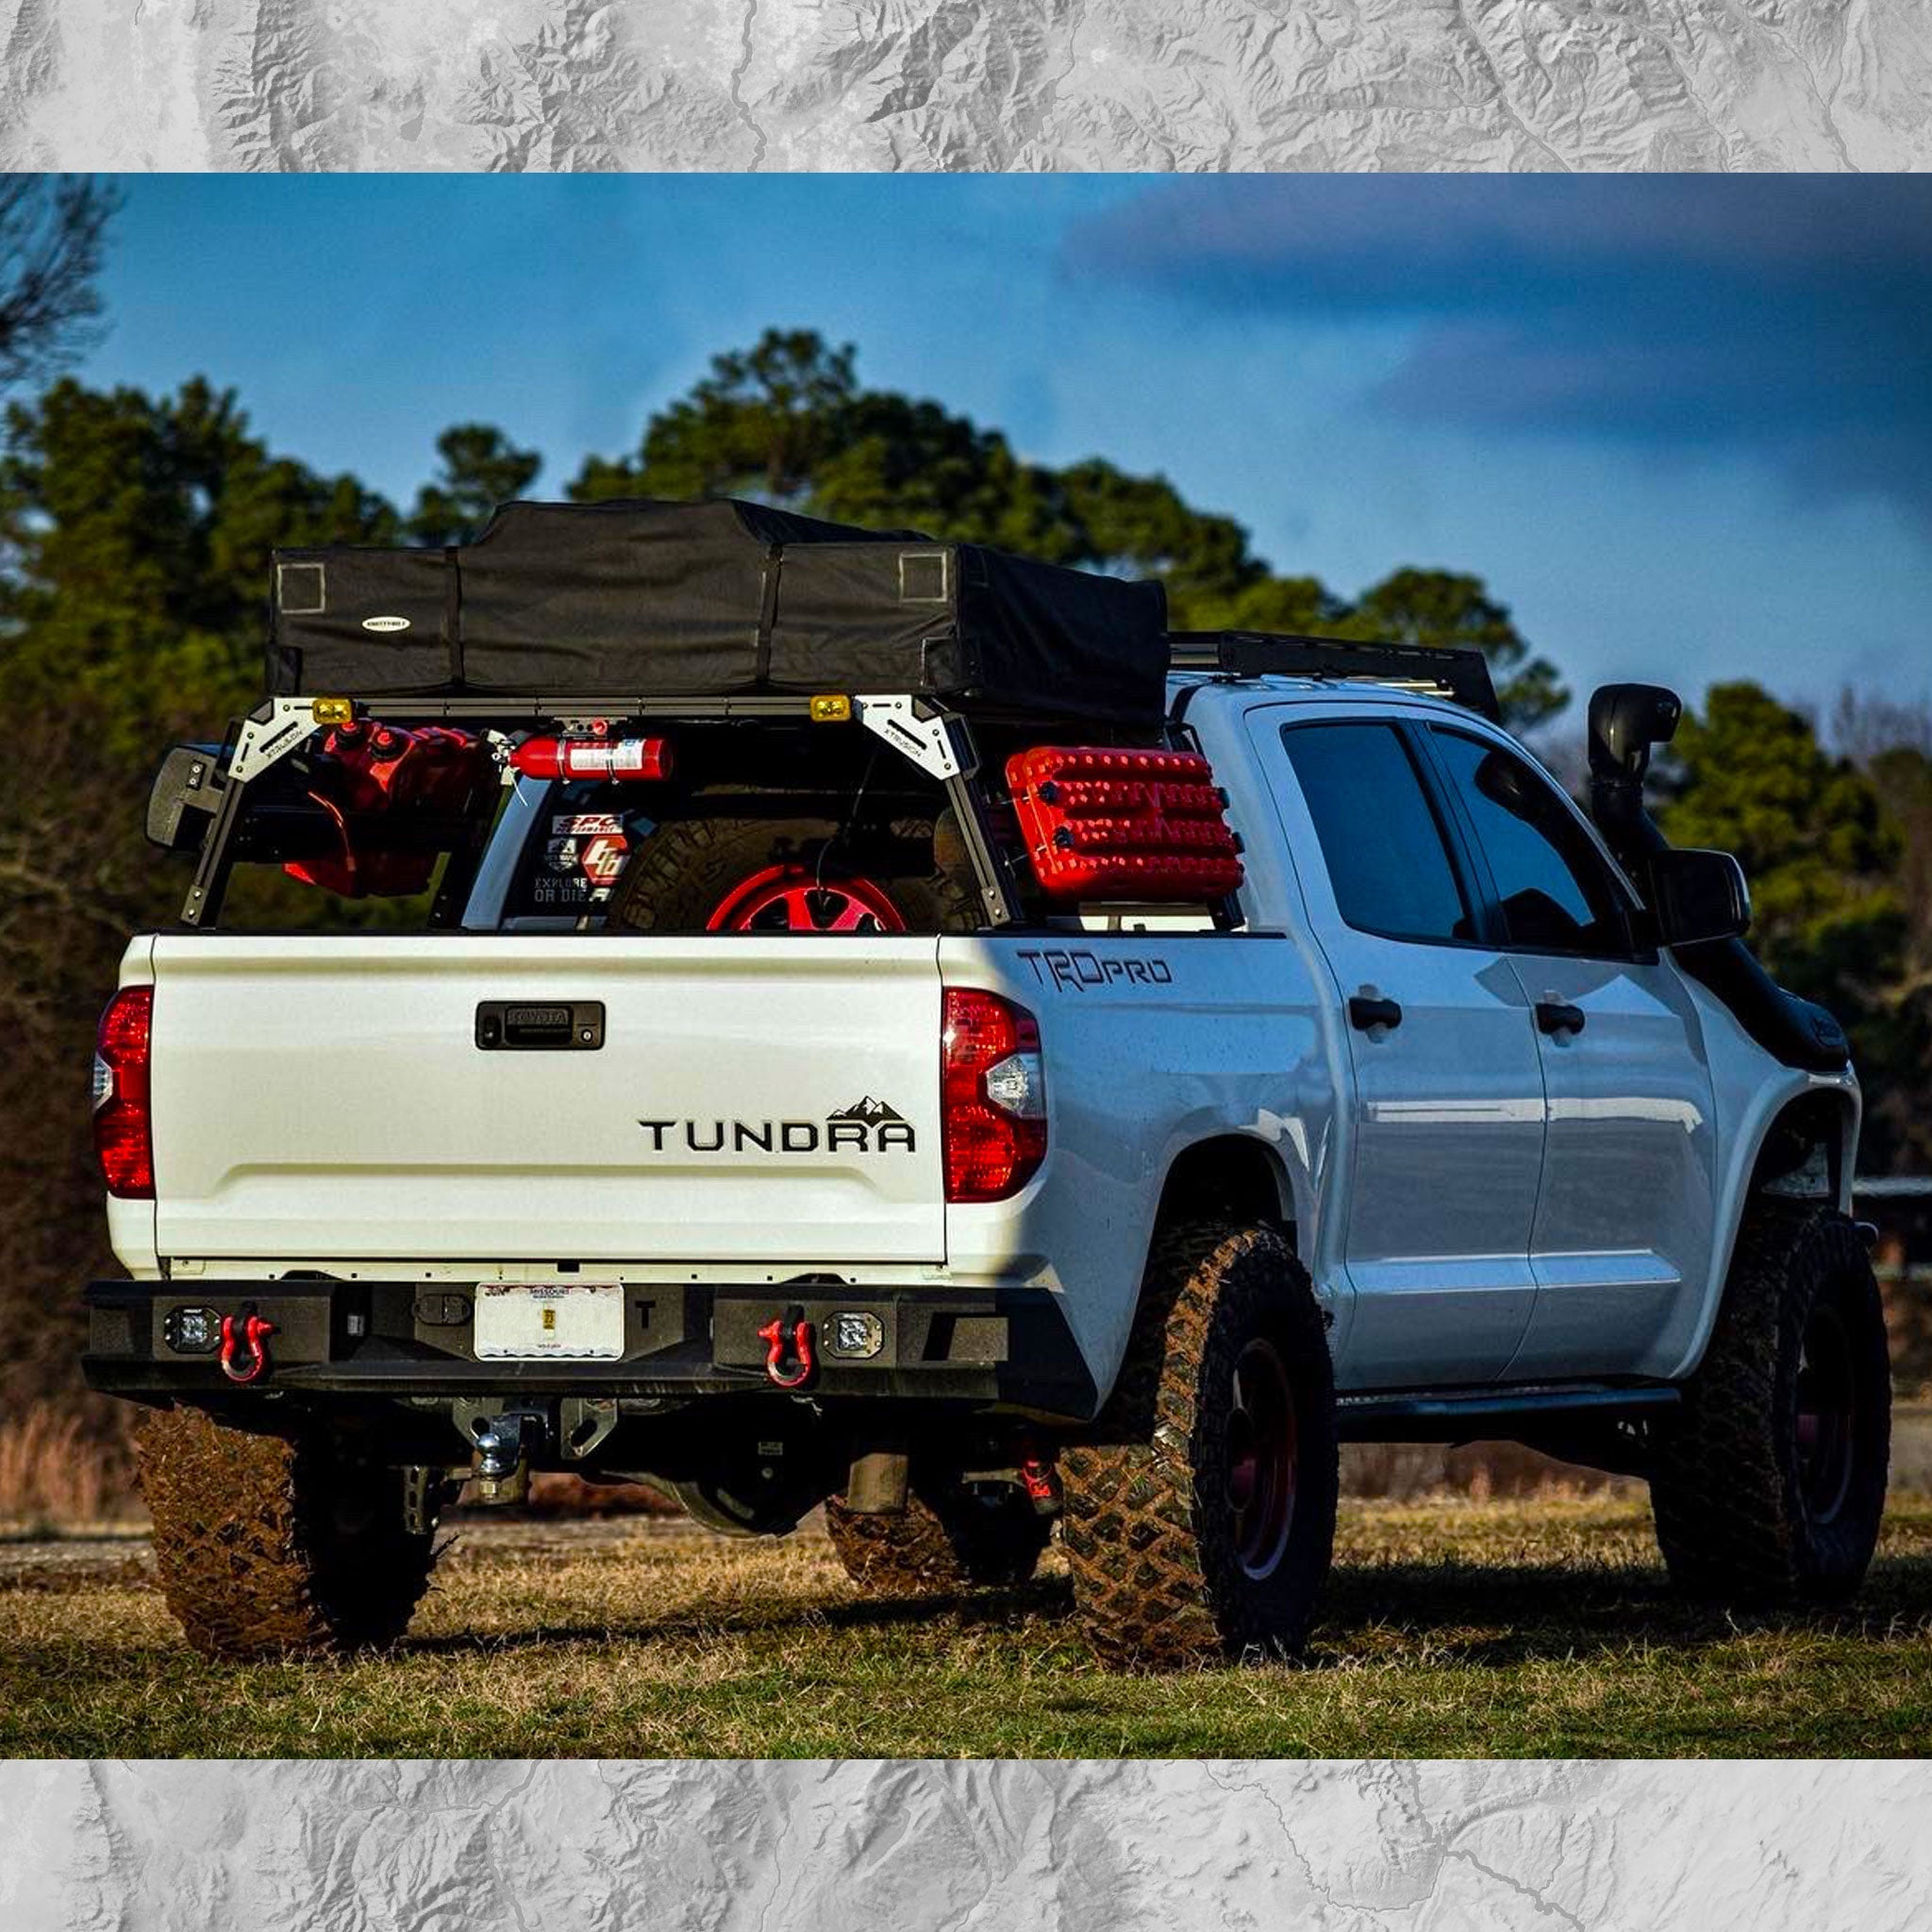 Toyota Tundra with Xtrusion Overland XTR1 Bed Rack with mounted traction boards, roof top tent, water tank, and RotoPax.